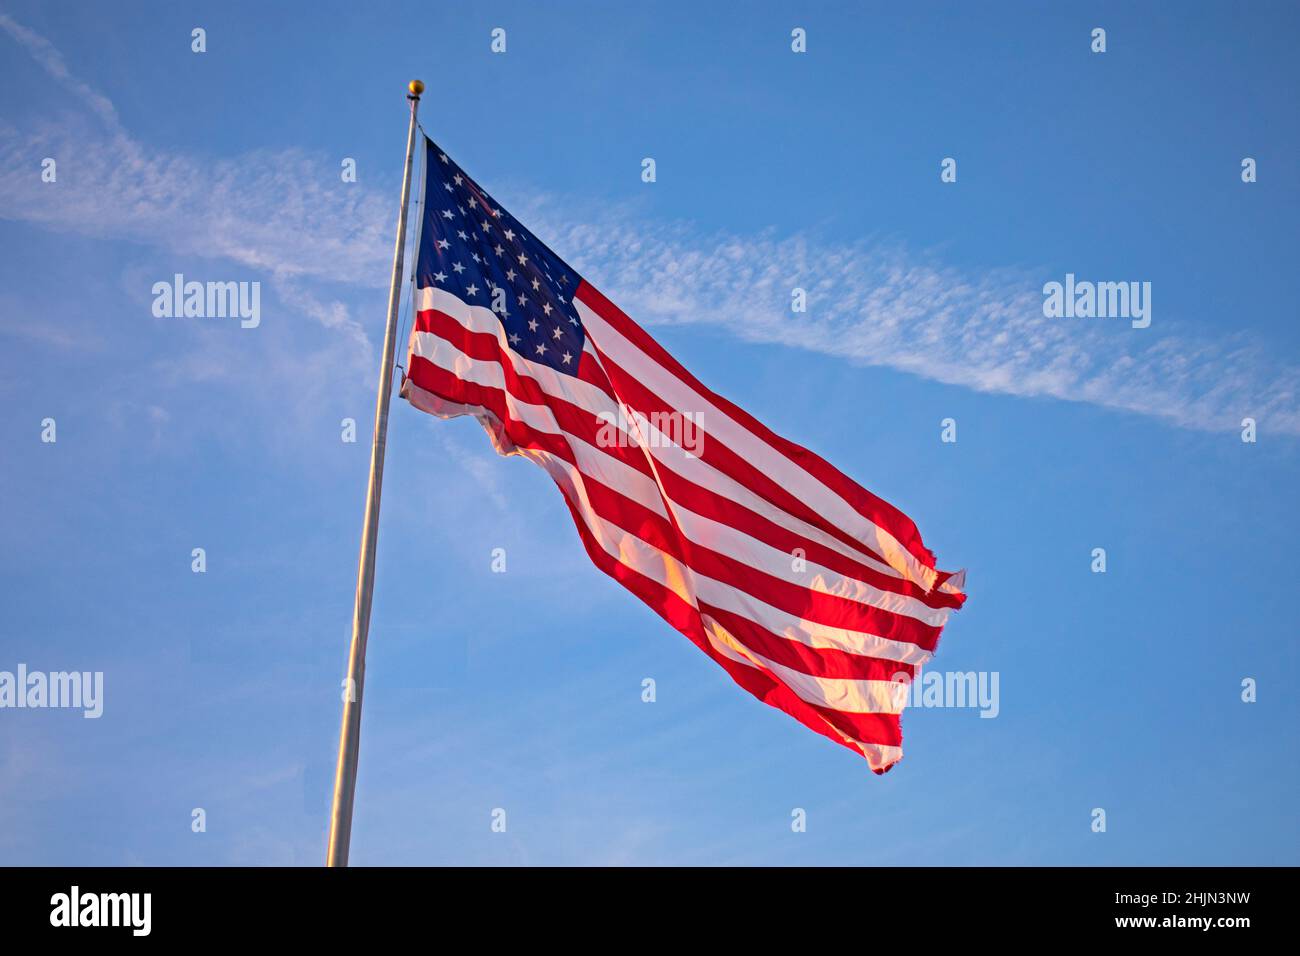 Single, large, isolated US flag flying high on a flagpole against a clear blue sky Stock Photo